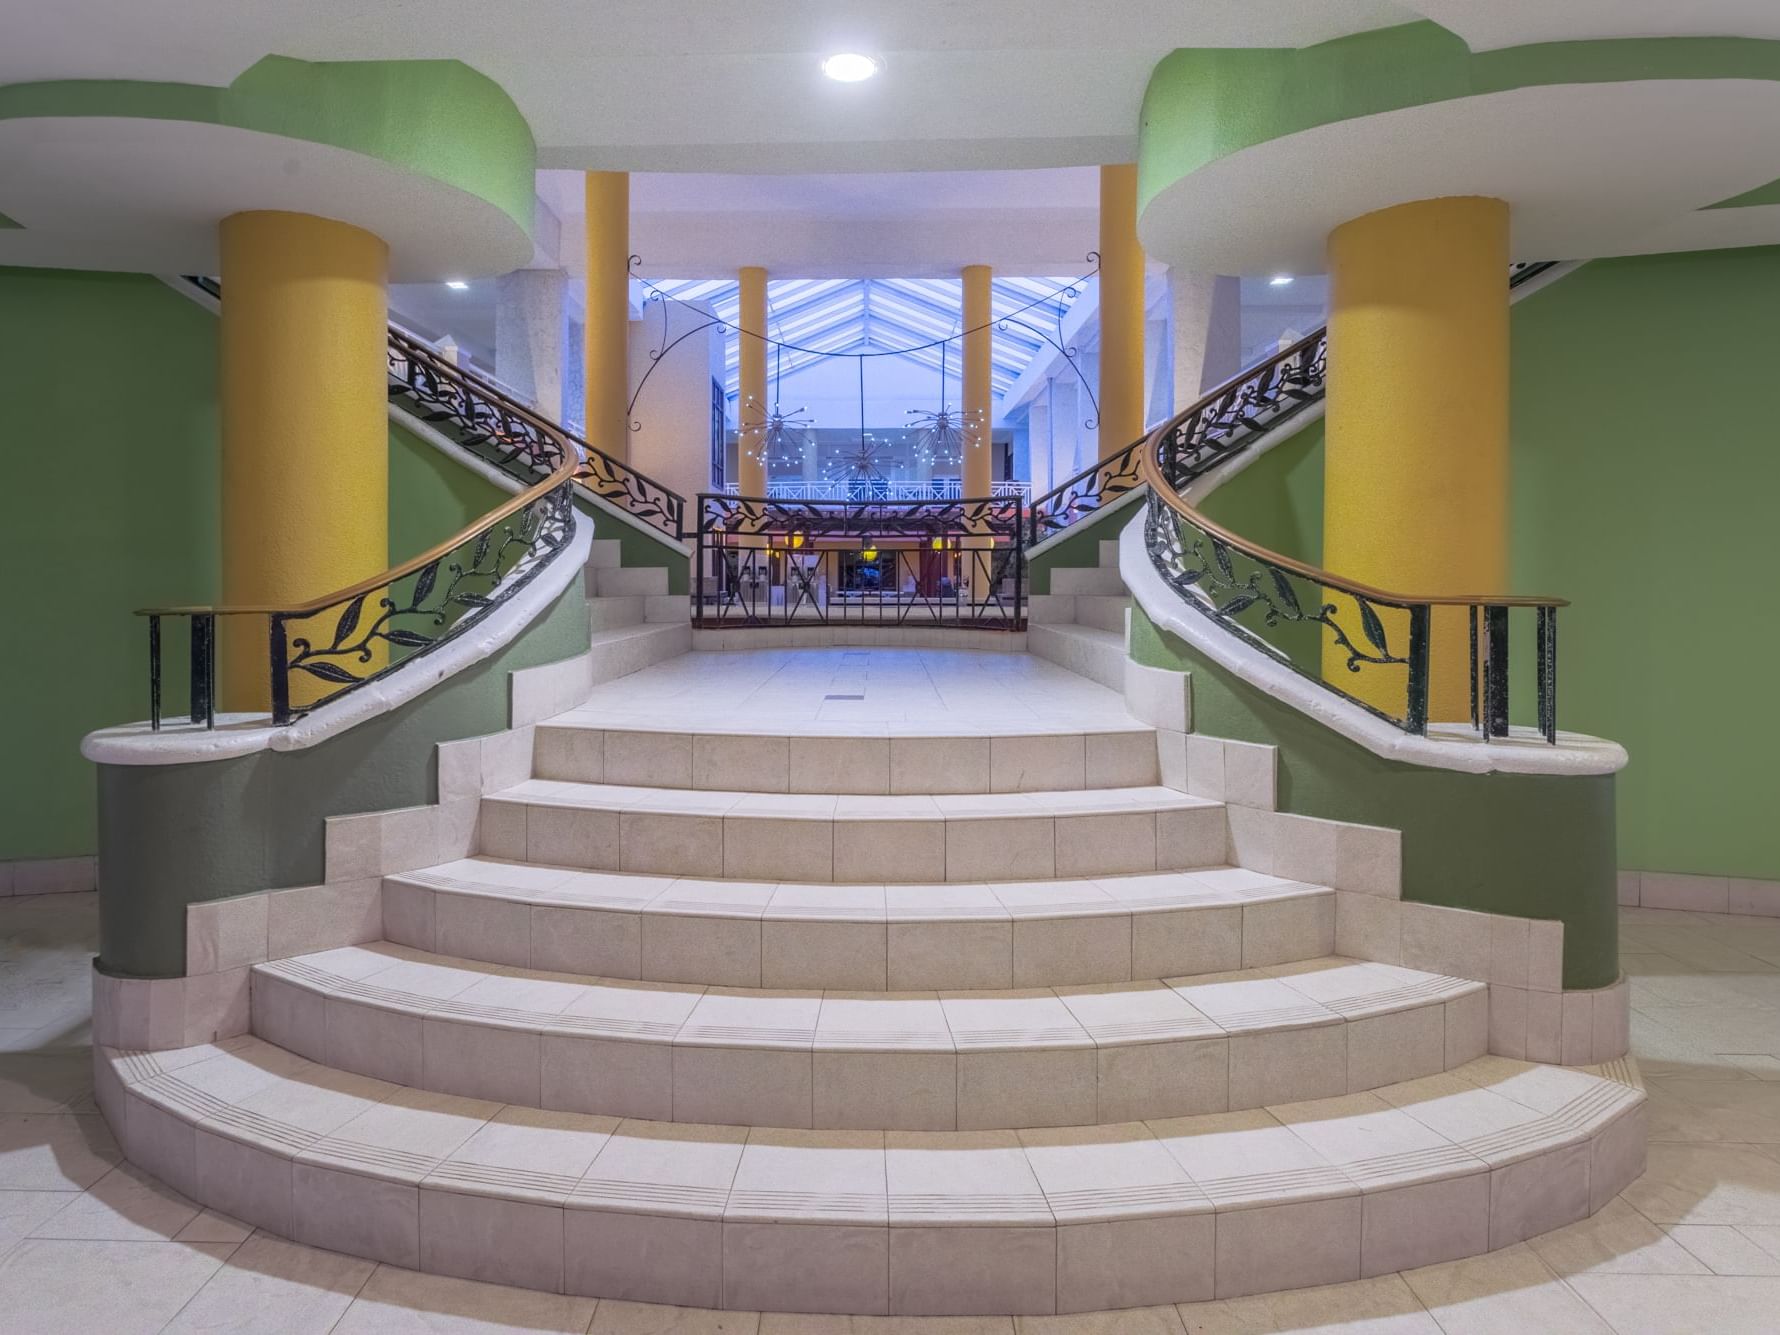 The grand staircase in Lobby Balcony at Holiday Inn Montego Bay